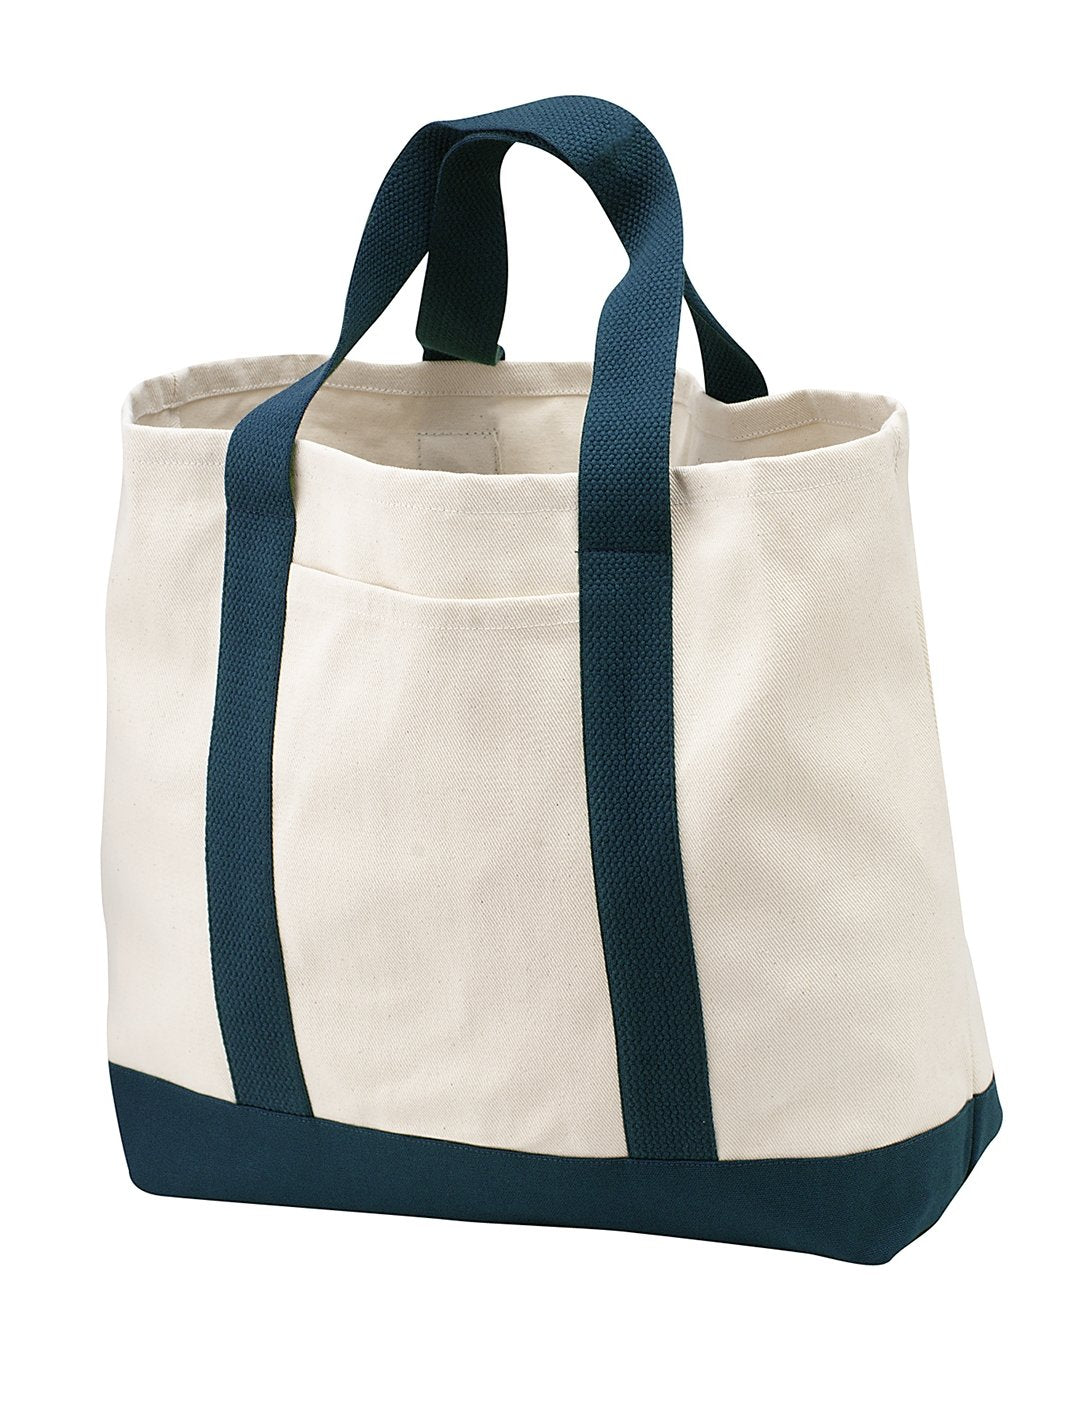 Wholesale Heavy Canvas Boat and Totes, Twill Open-Top Beach Bags Bulk